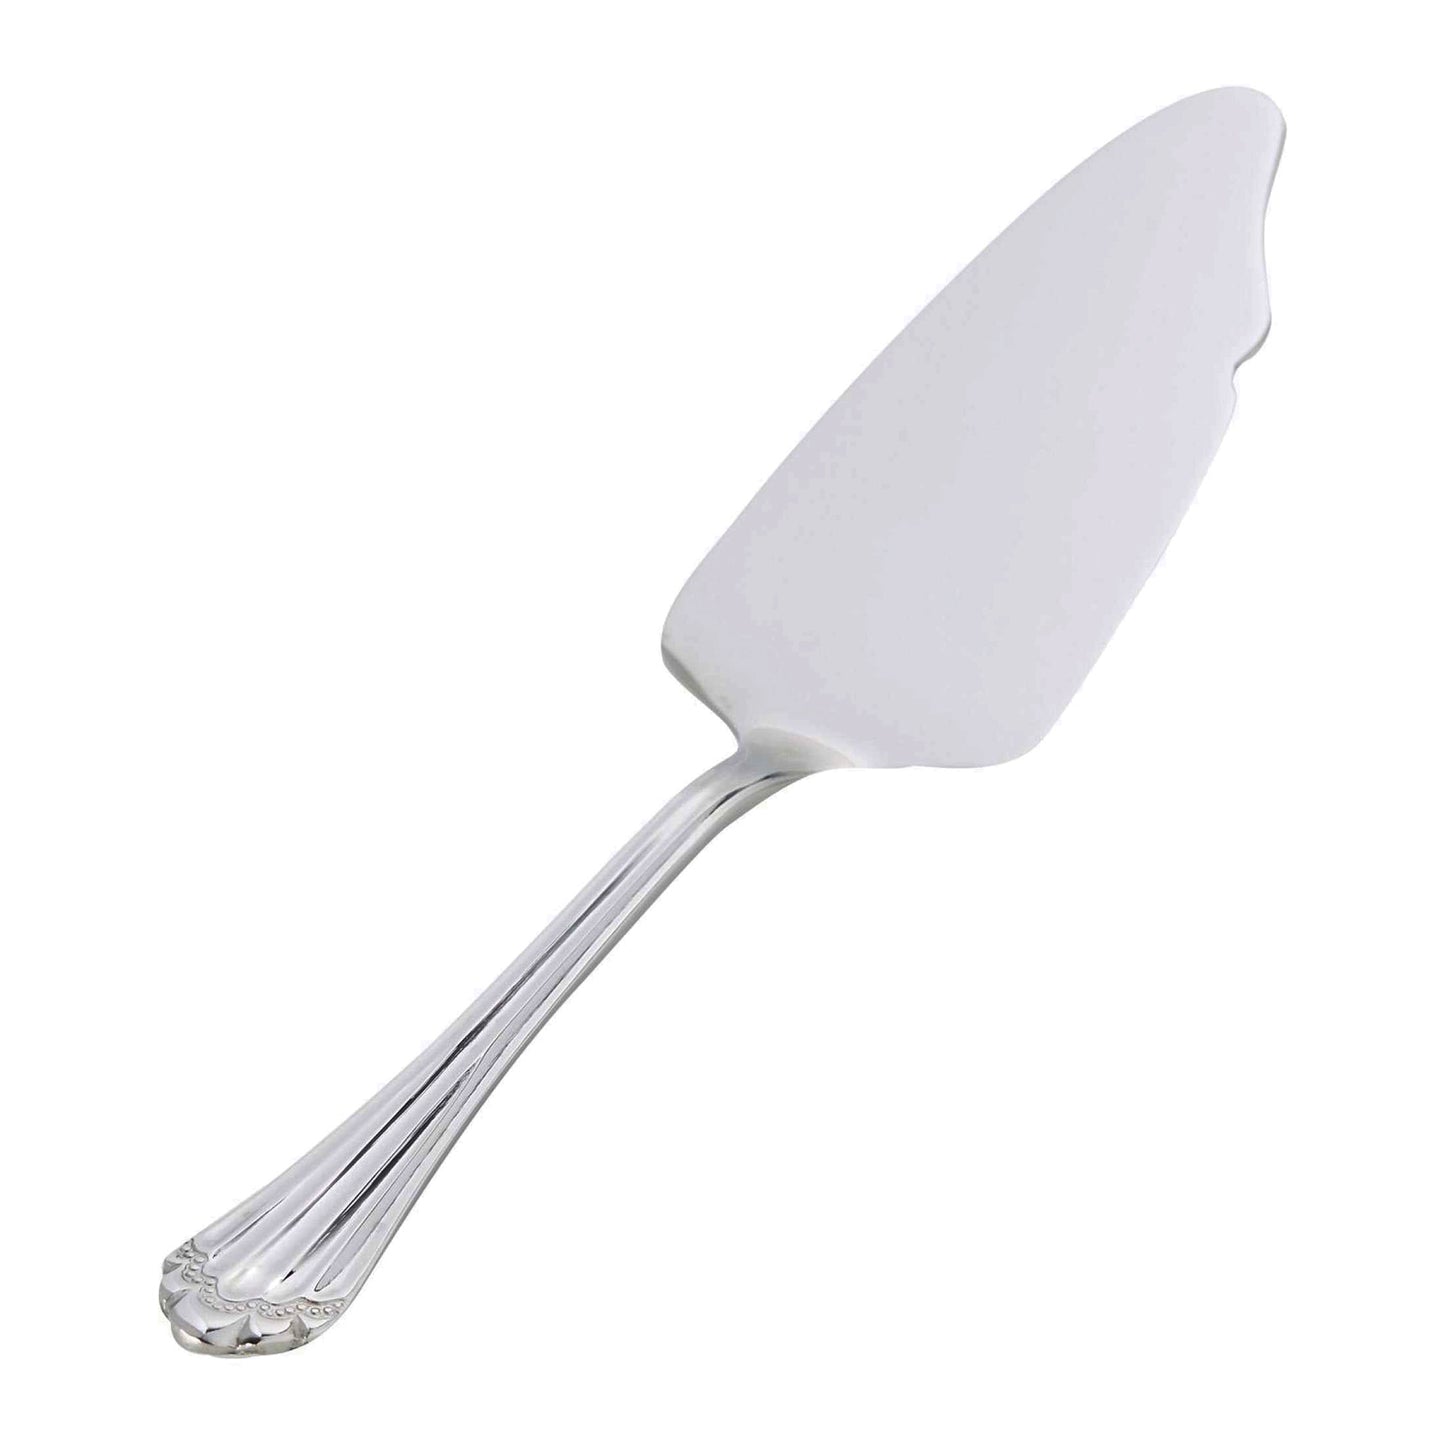 Classic Gothic Cake/Pie Server (18/10 Stainless Steel)